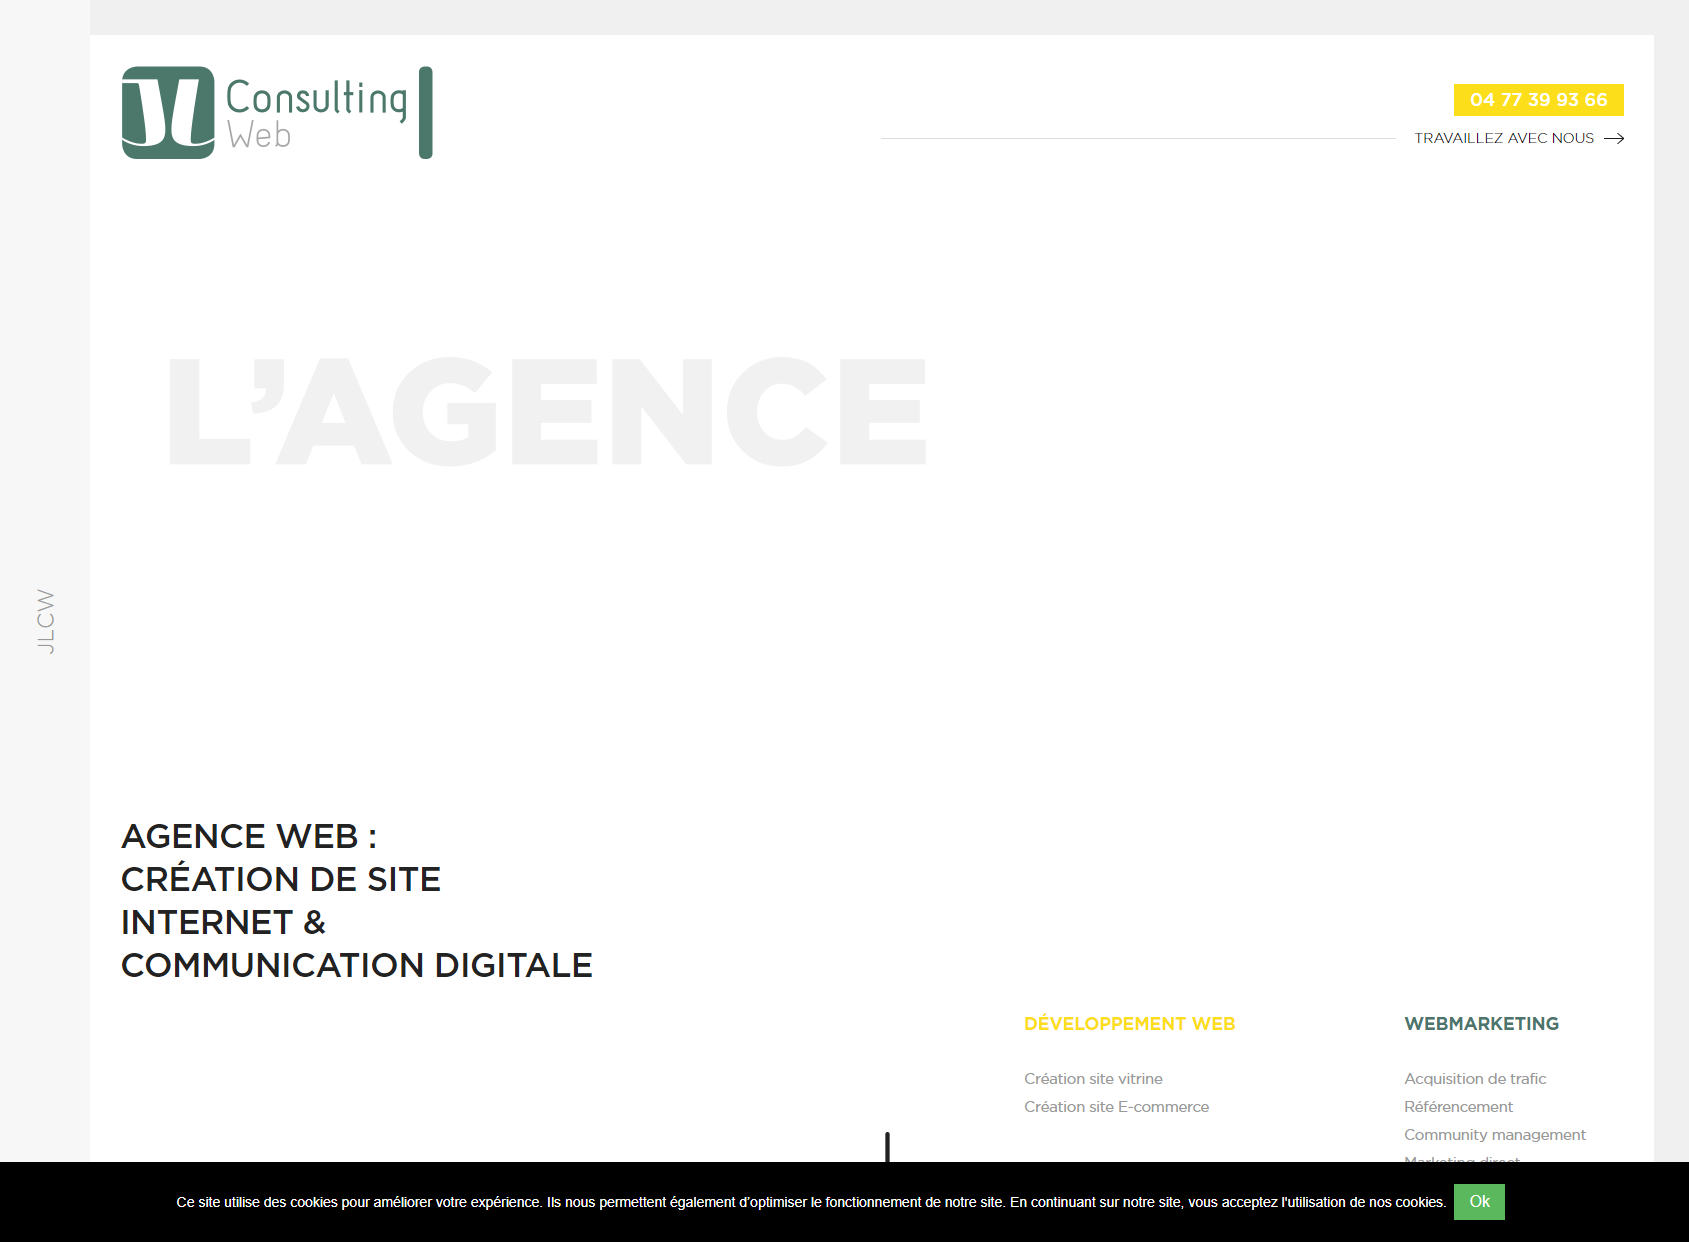 JL Consulting Web